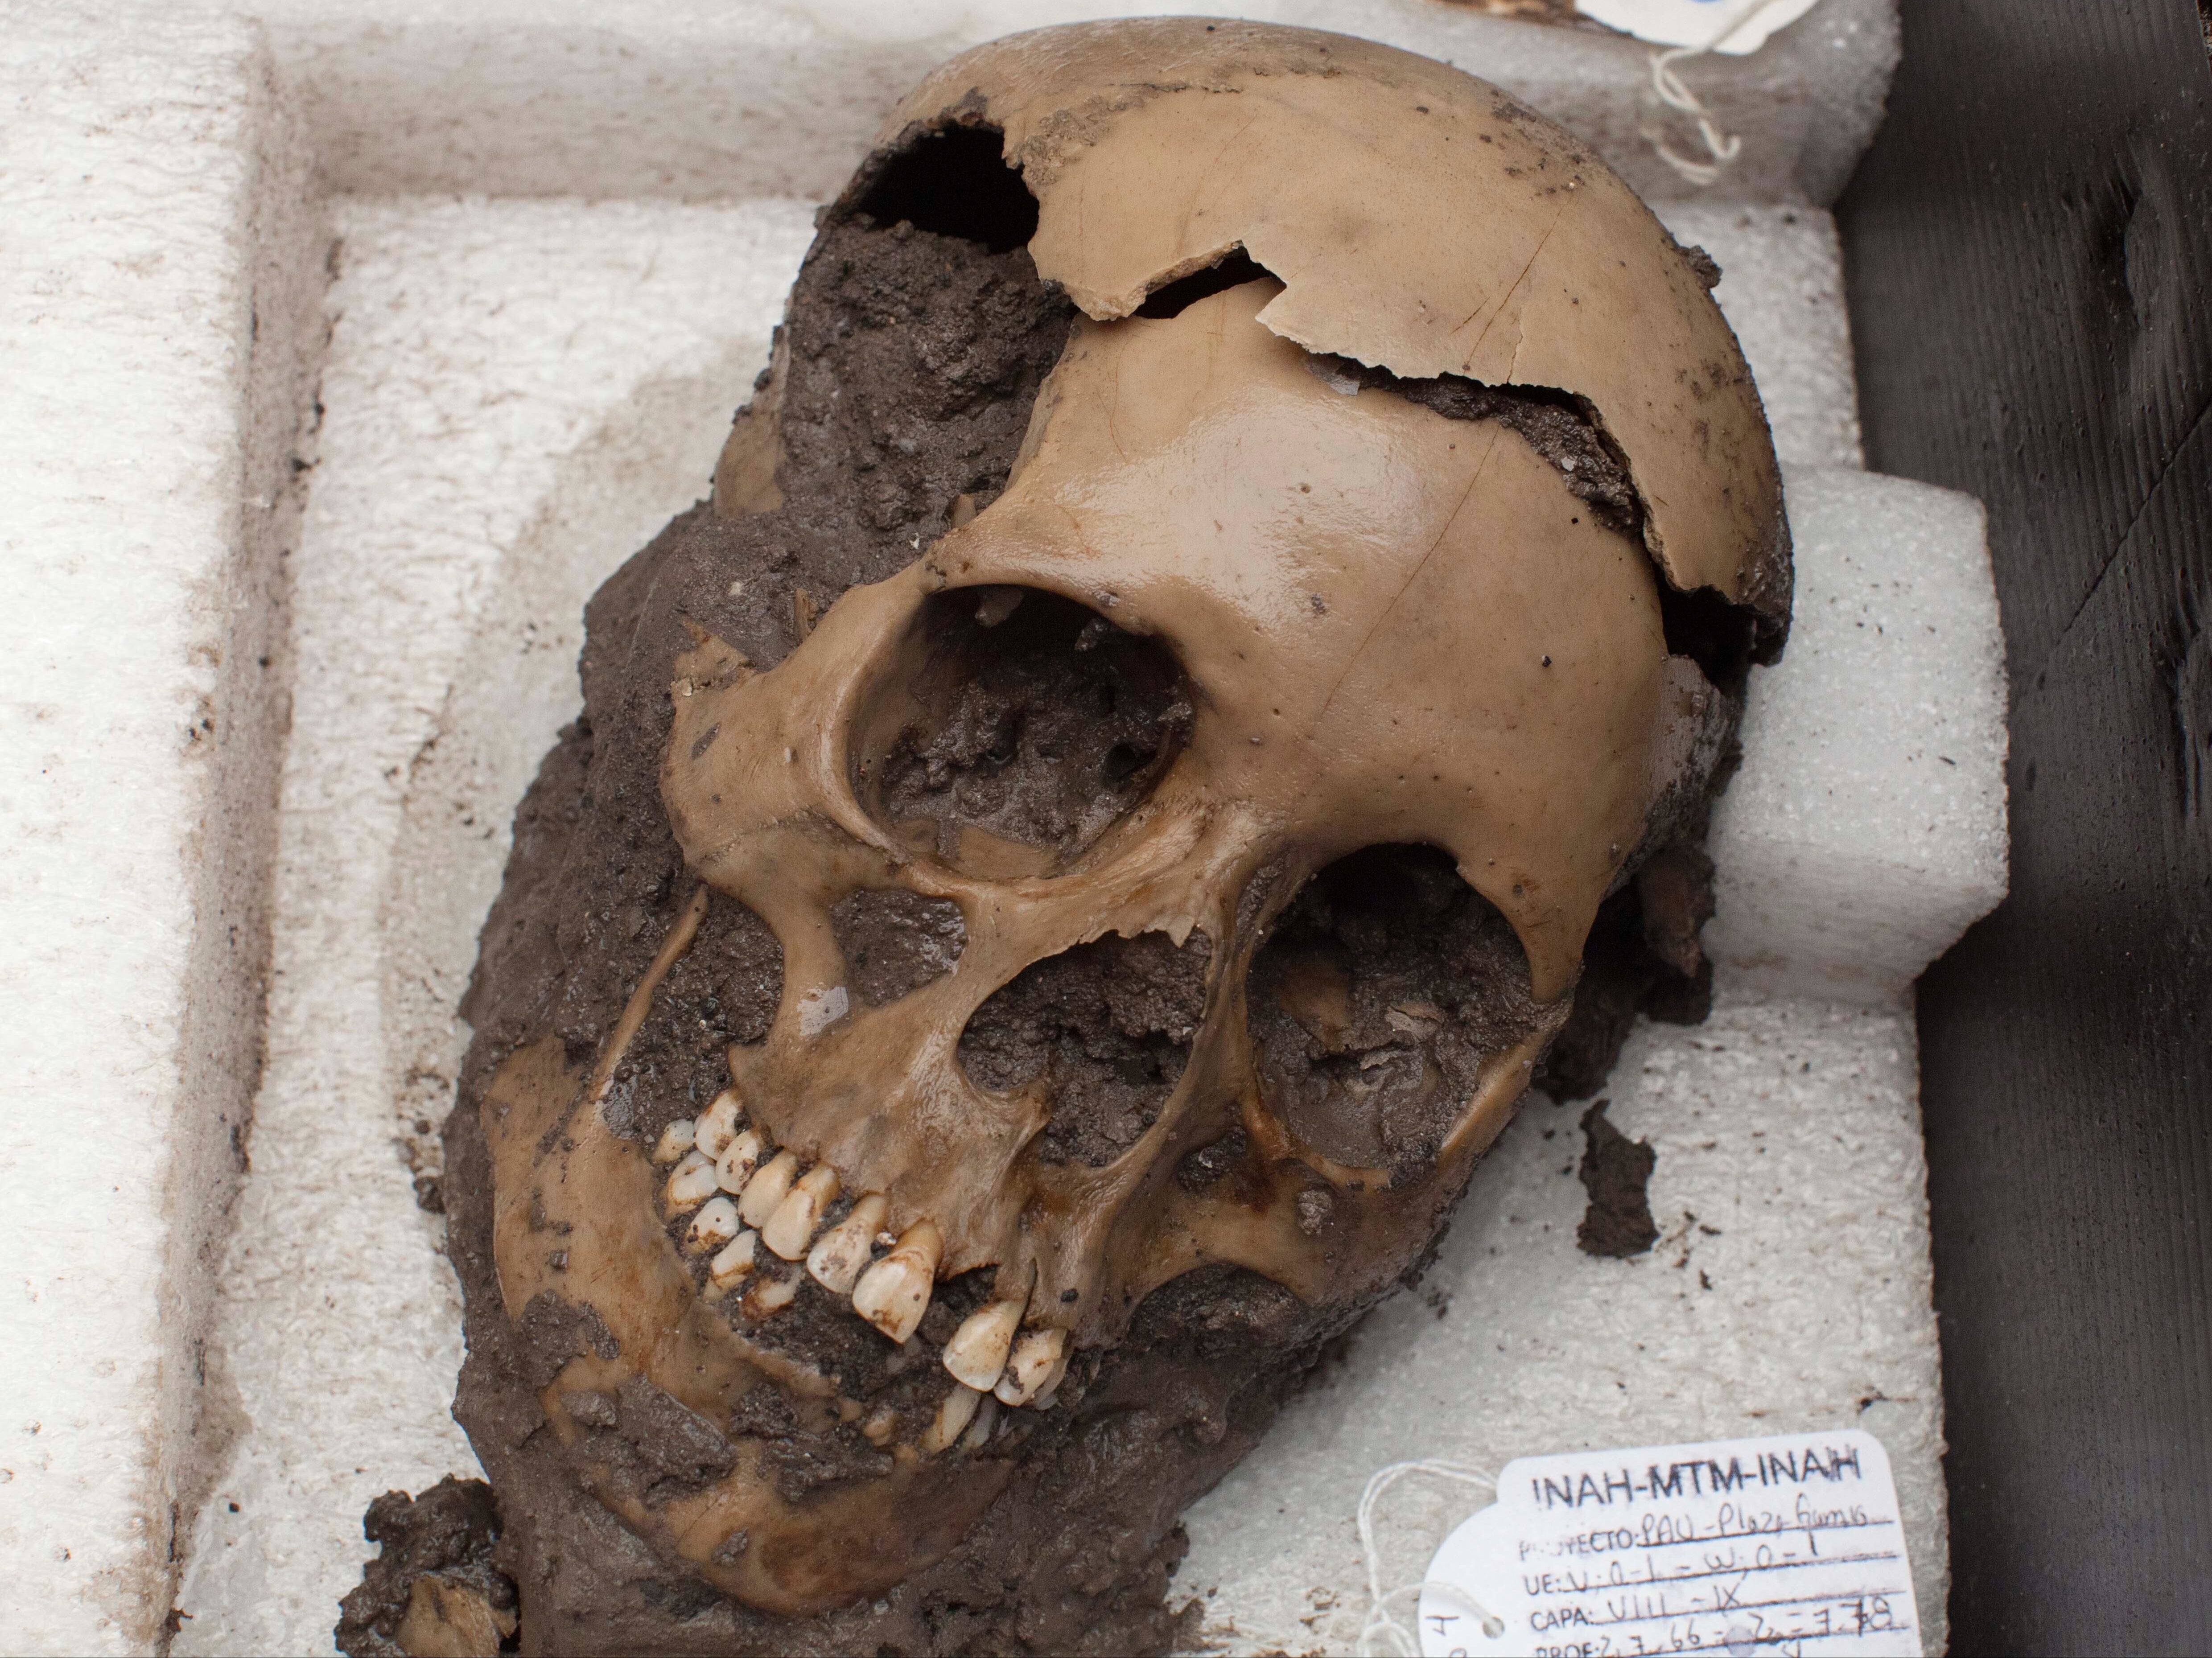 One of the skulls found in Chiapas